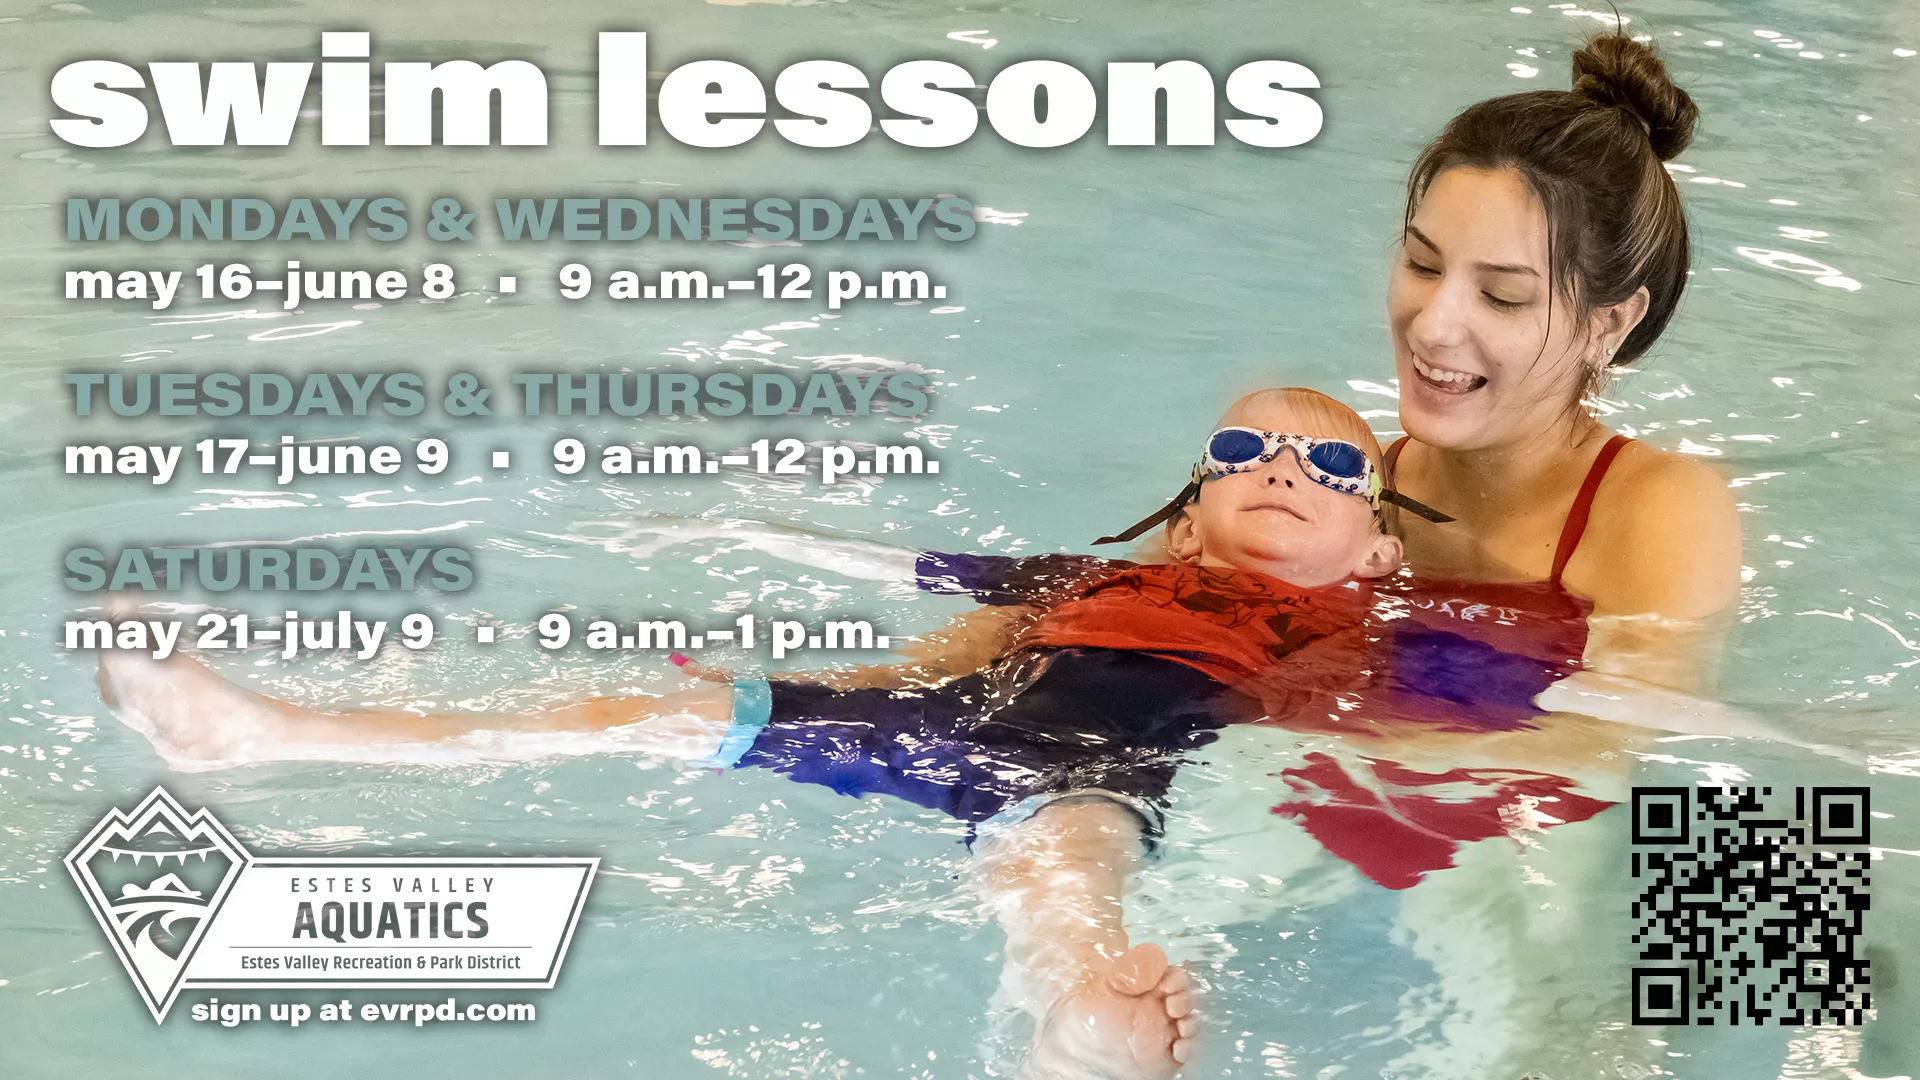 swim lessons for people of all ages!